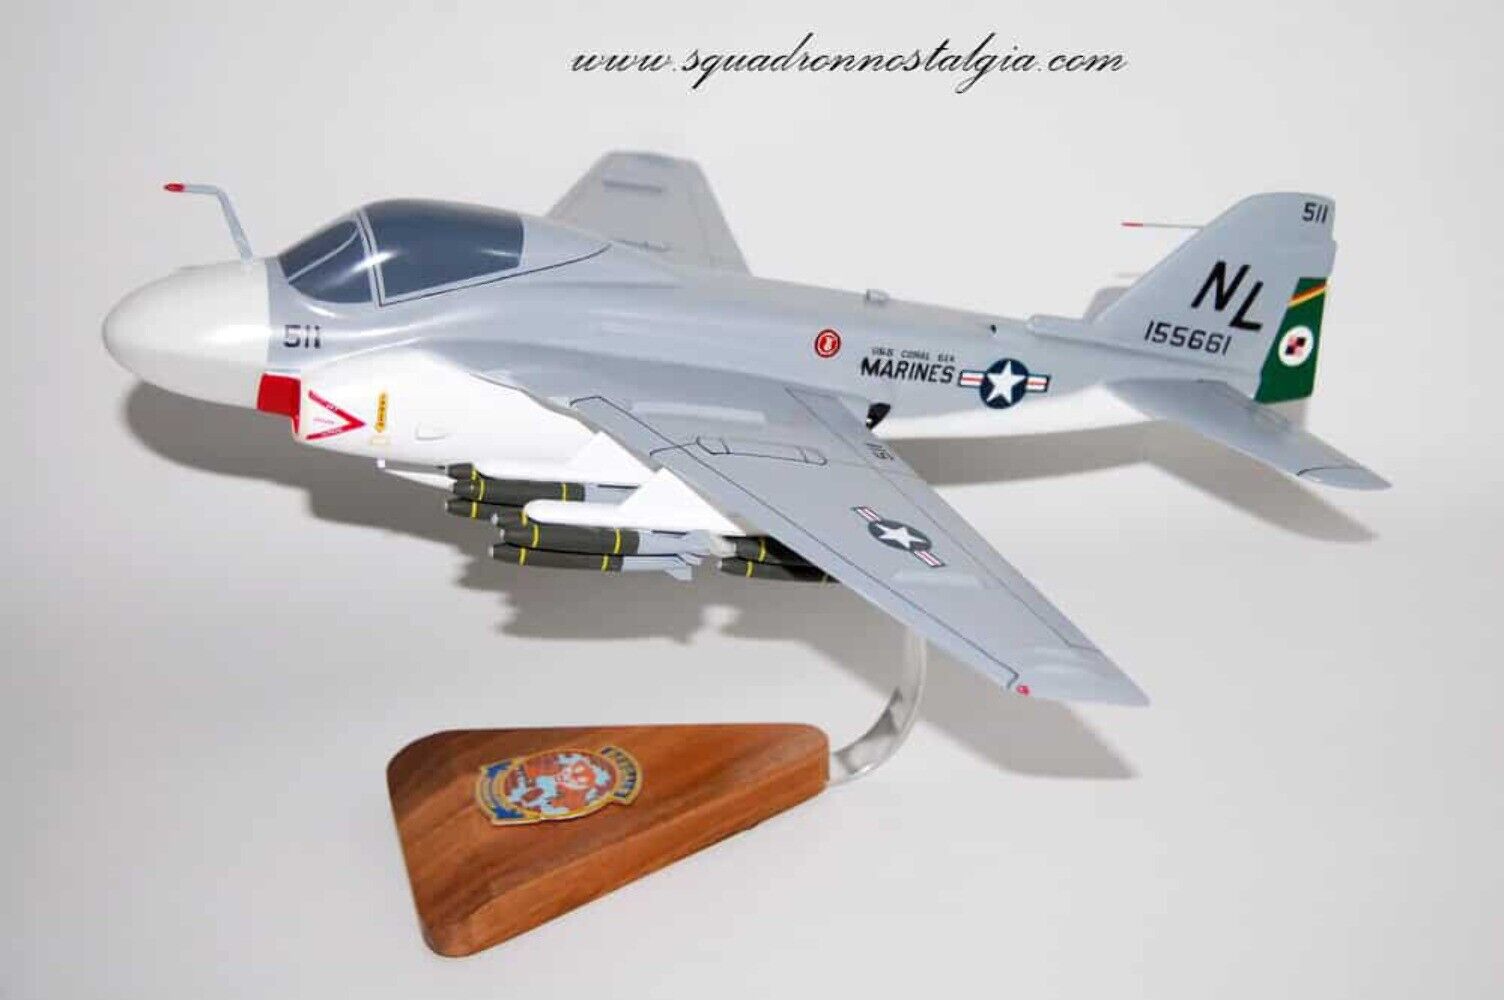 VMA(AW)-224 Fighting Bengals A-6 Intruder Model, 1/36th Scale, Mahogany, Marines